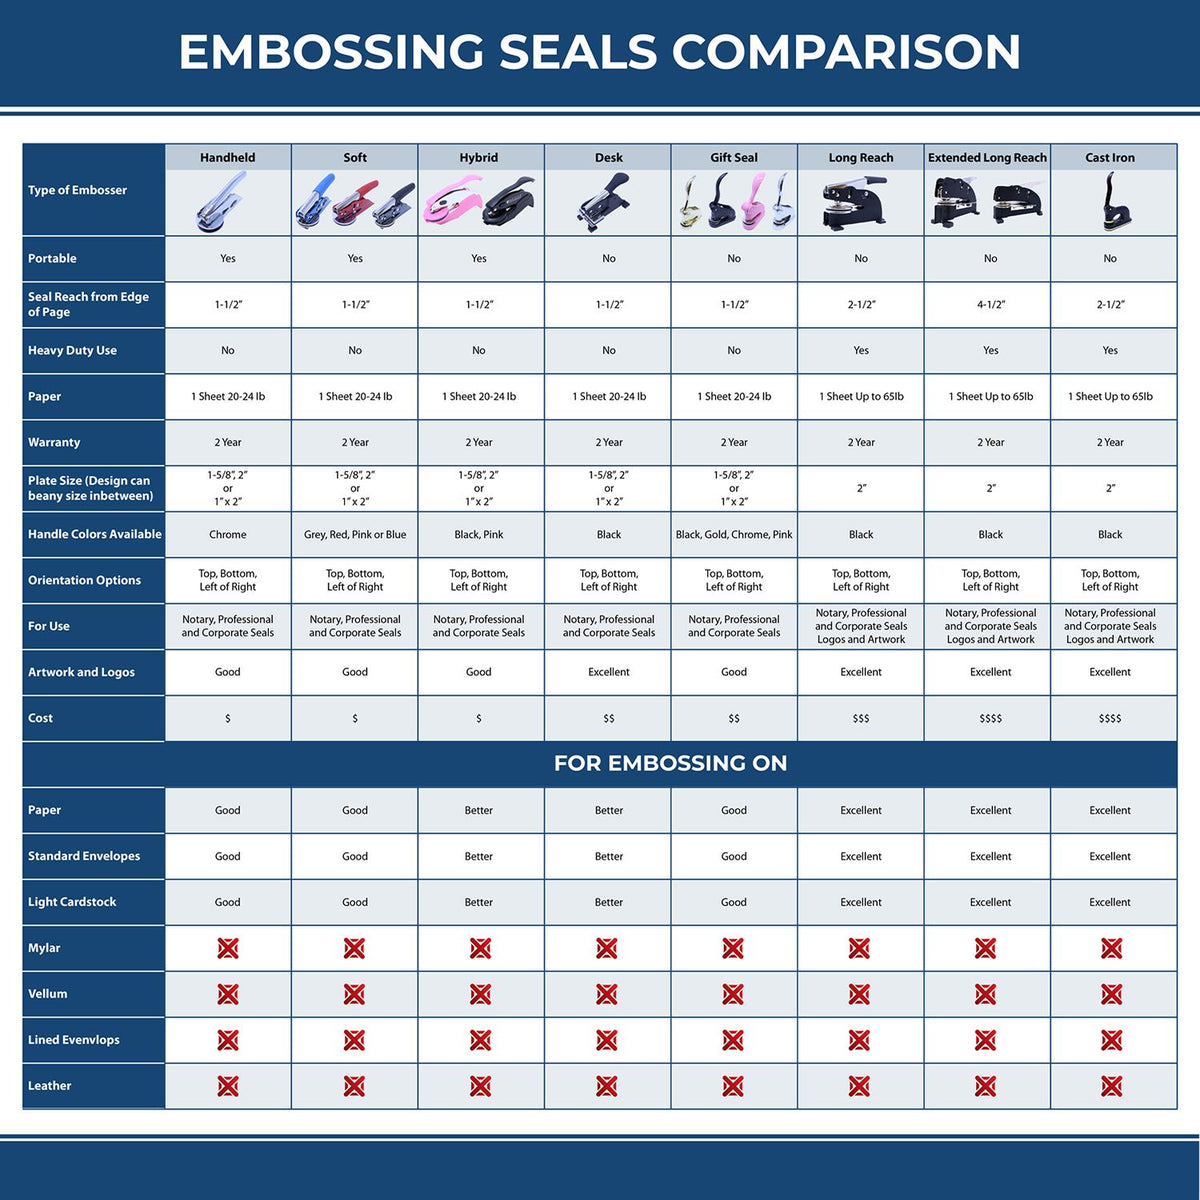 A comparison chart for the different types of mount models available for the Heavy Duty Cast Iron Pennsylvania Engineer Seal Embosser.